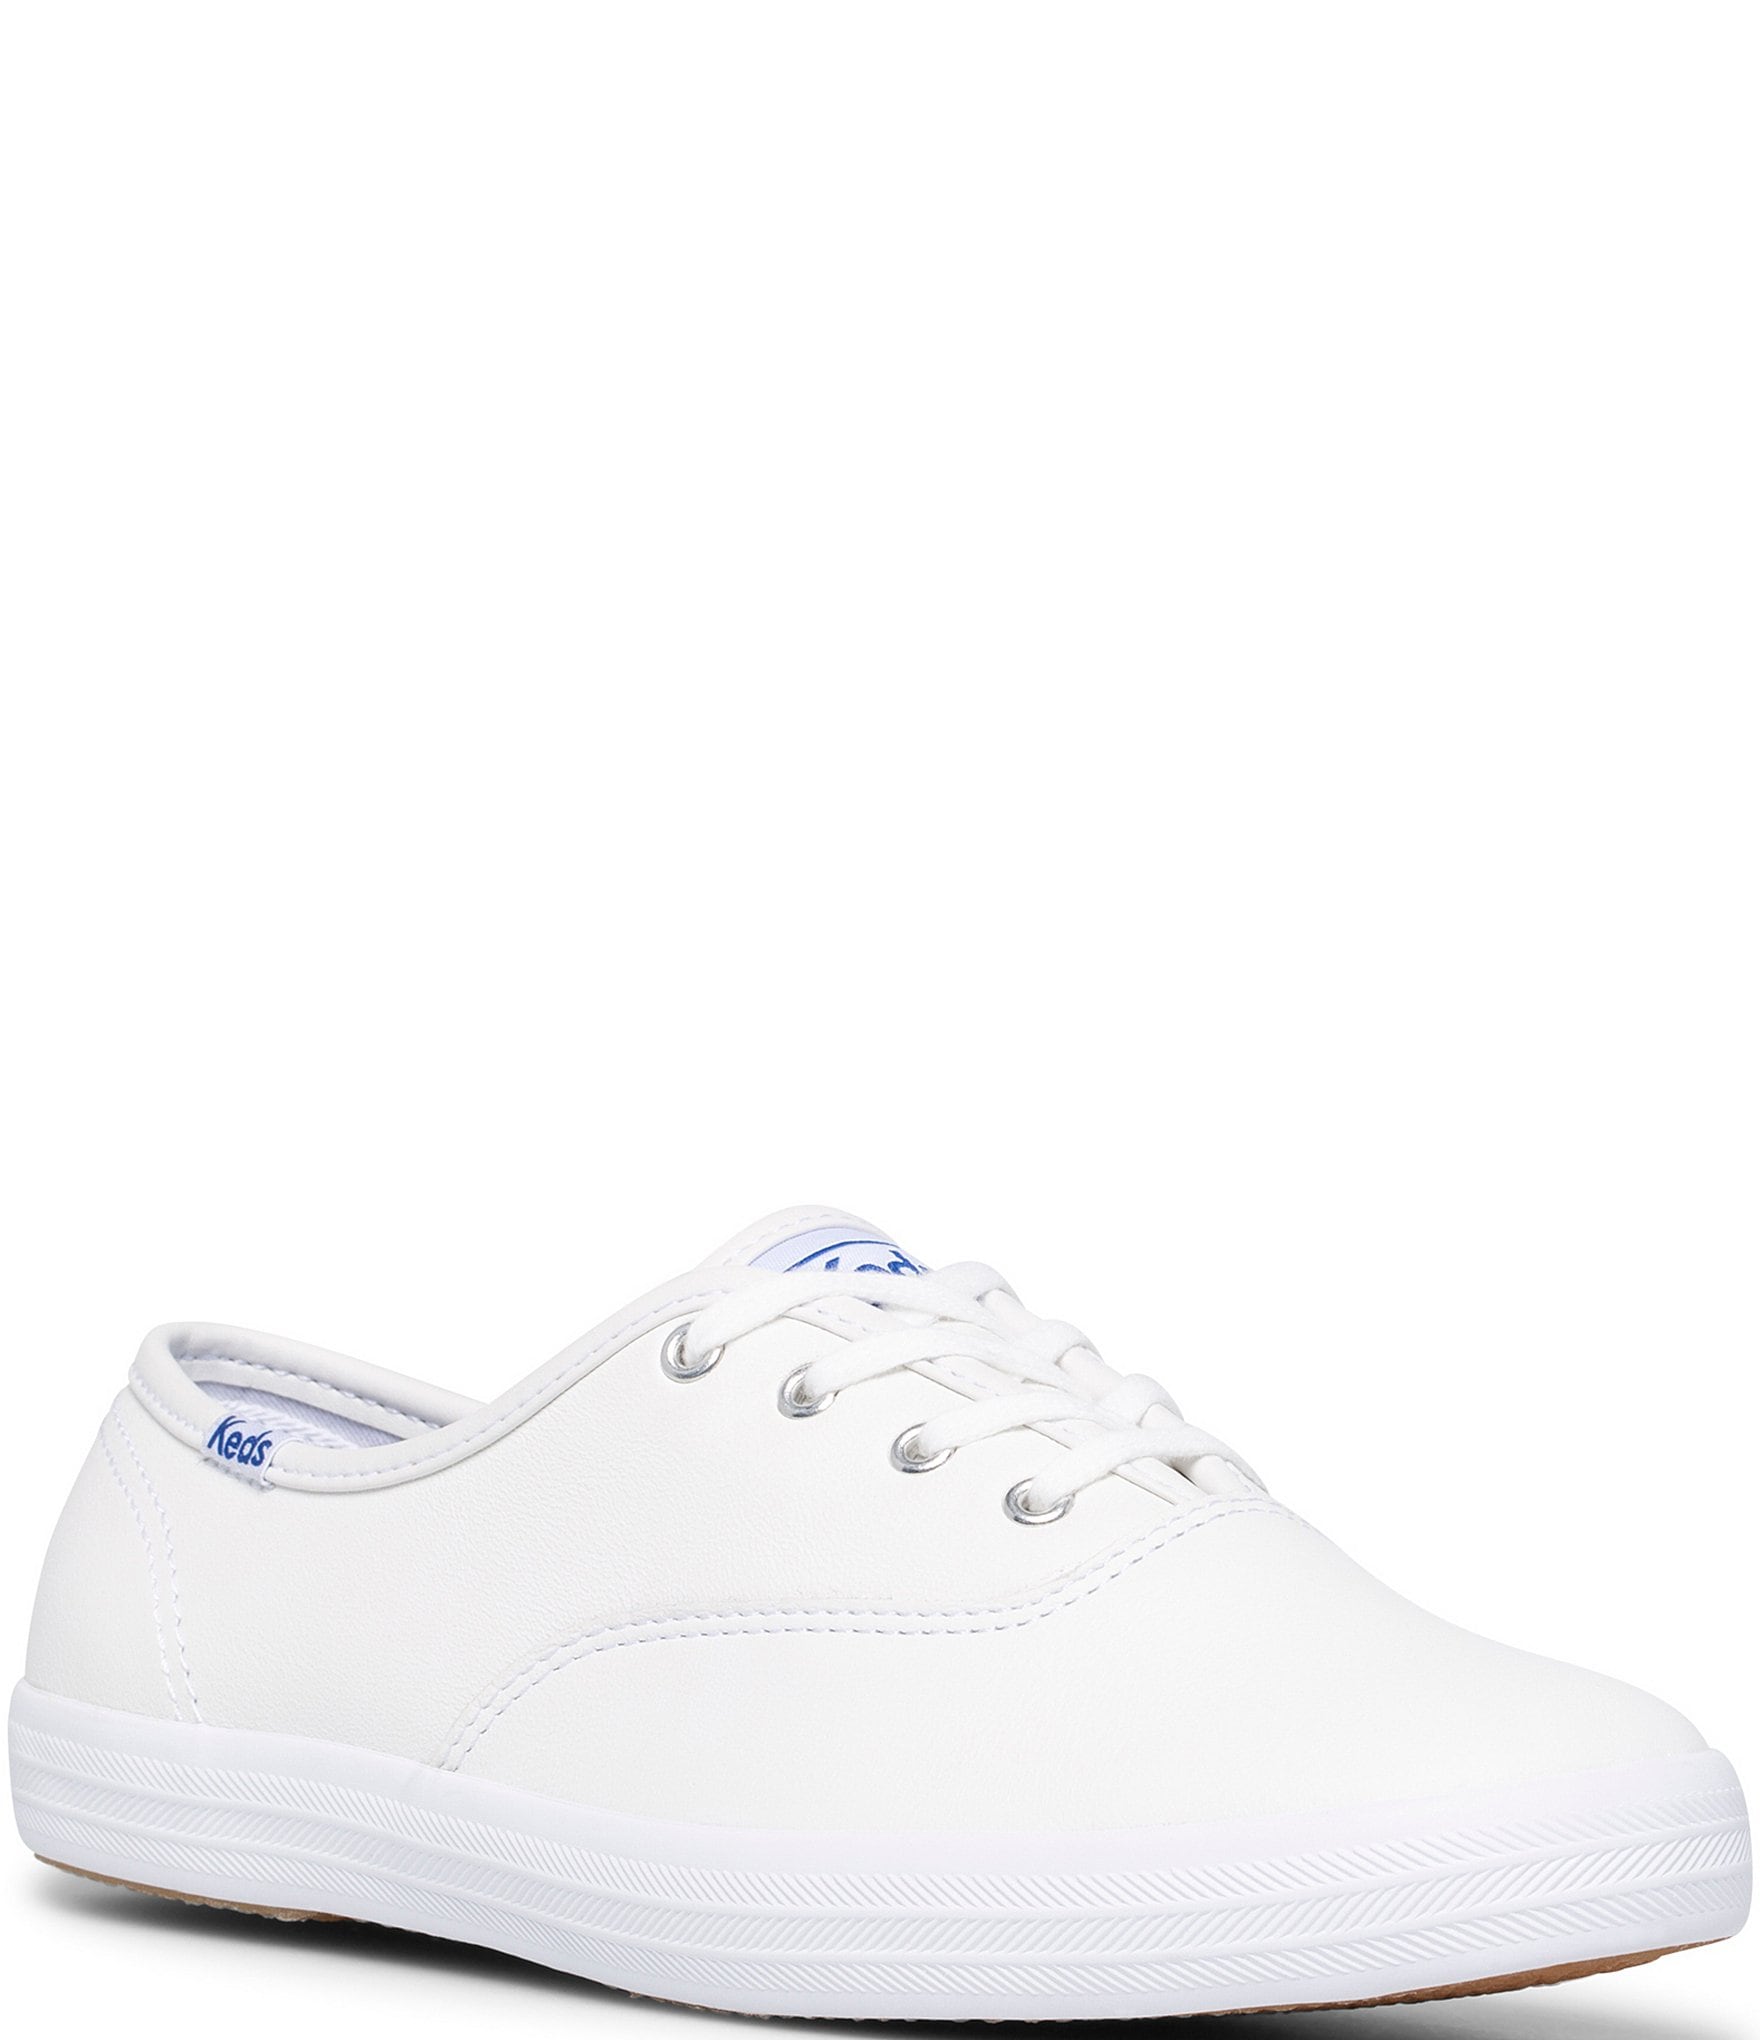 keds champion leather sneakers